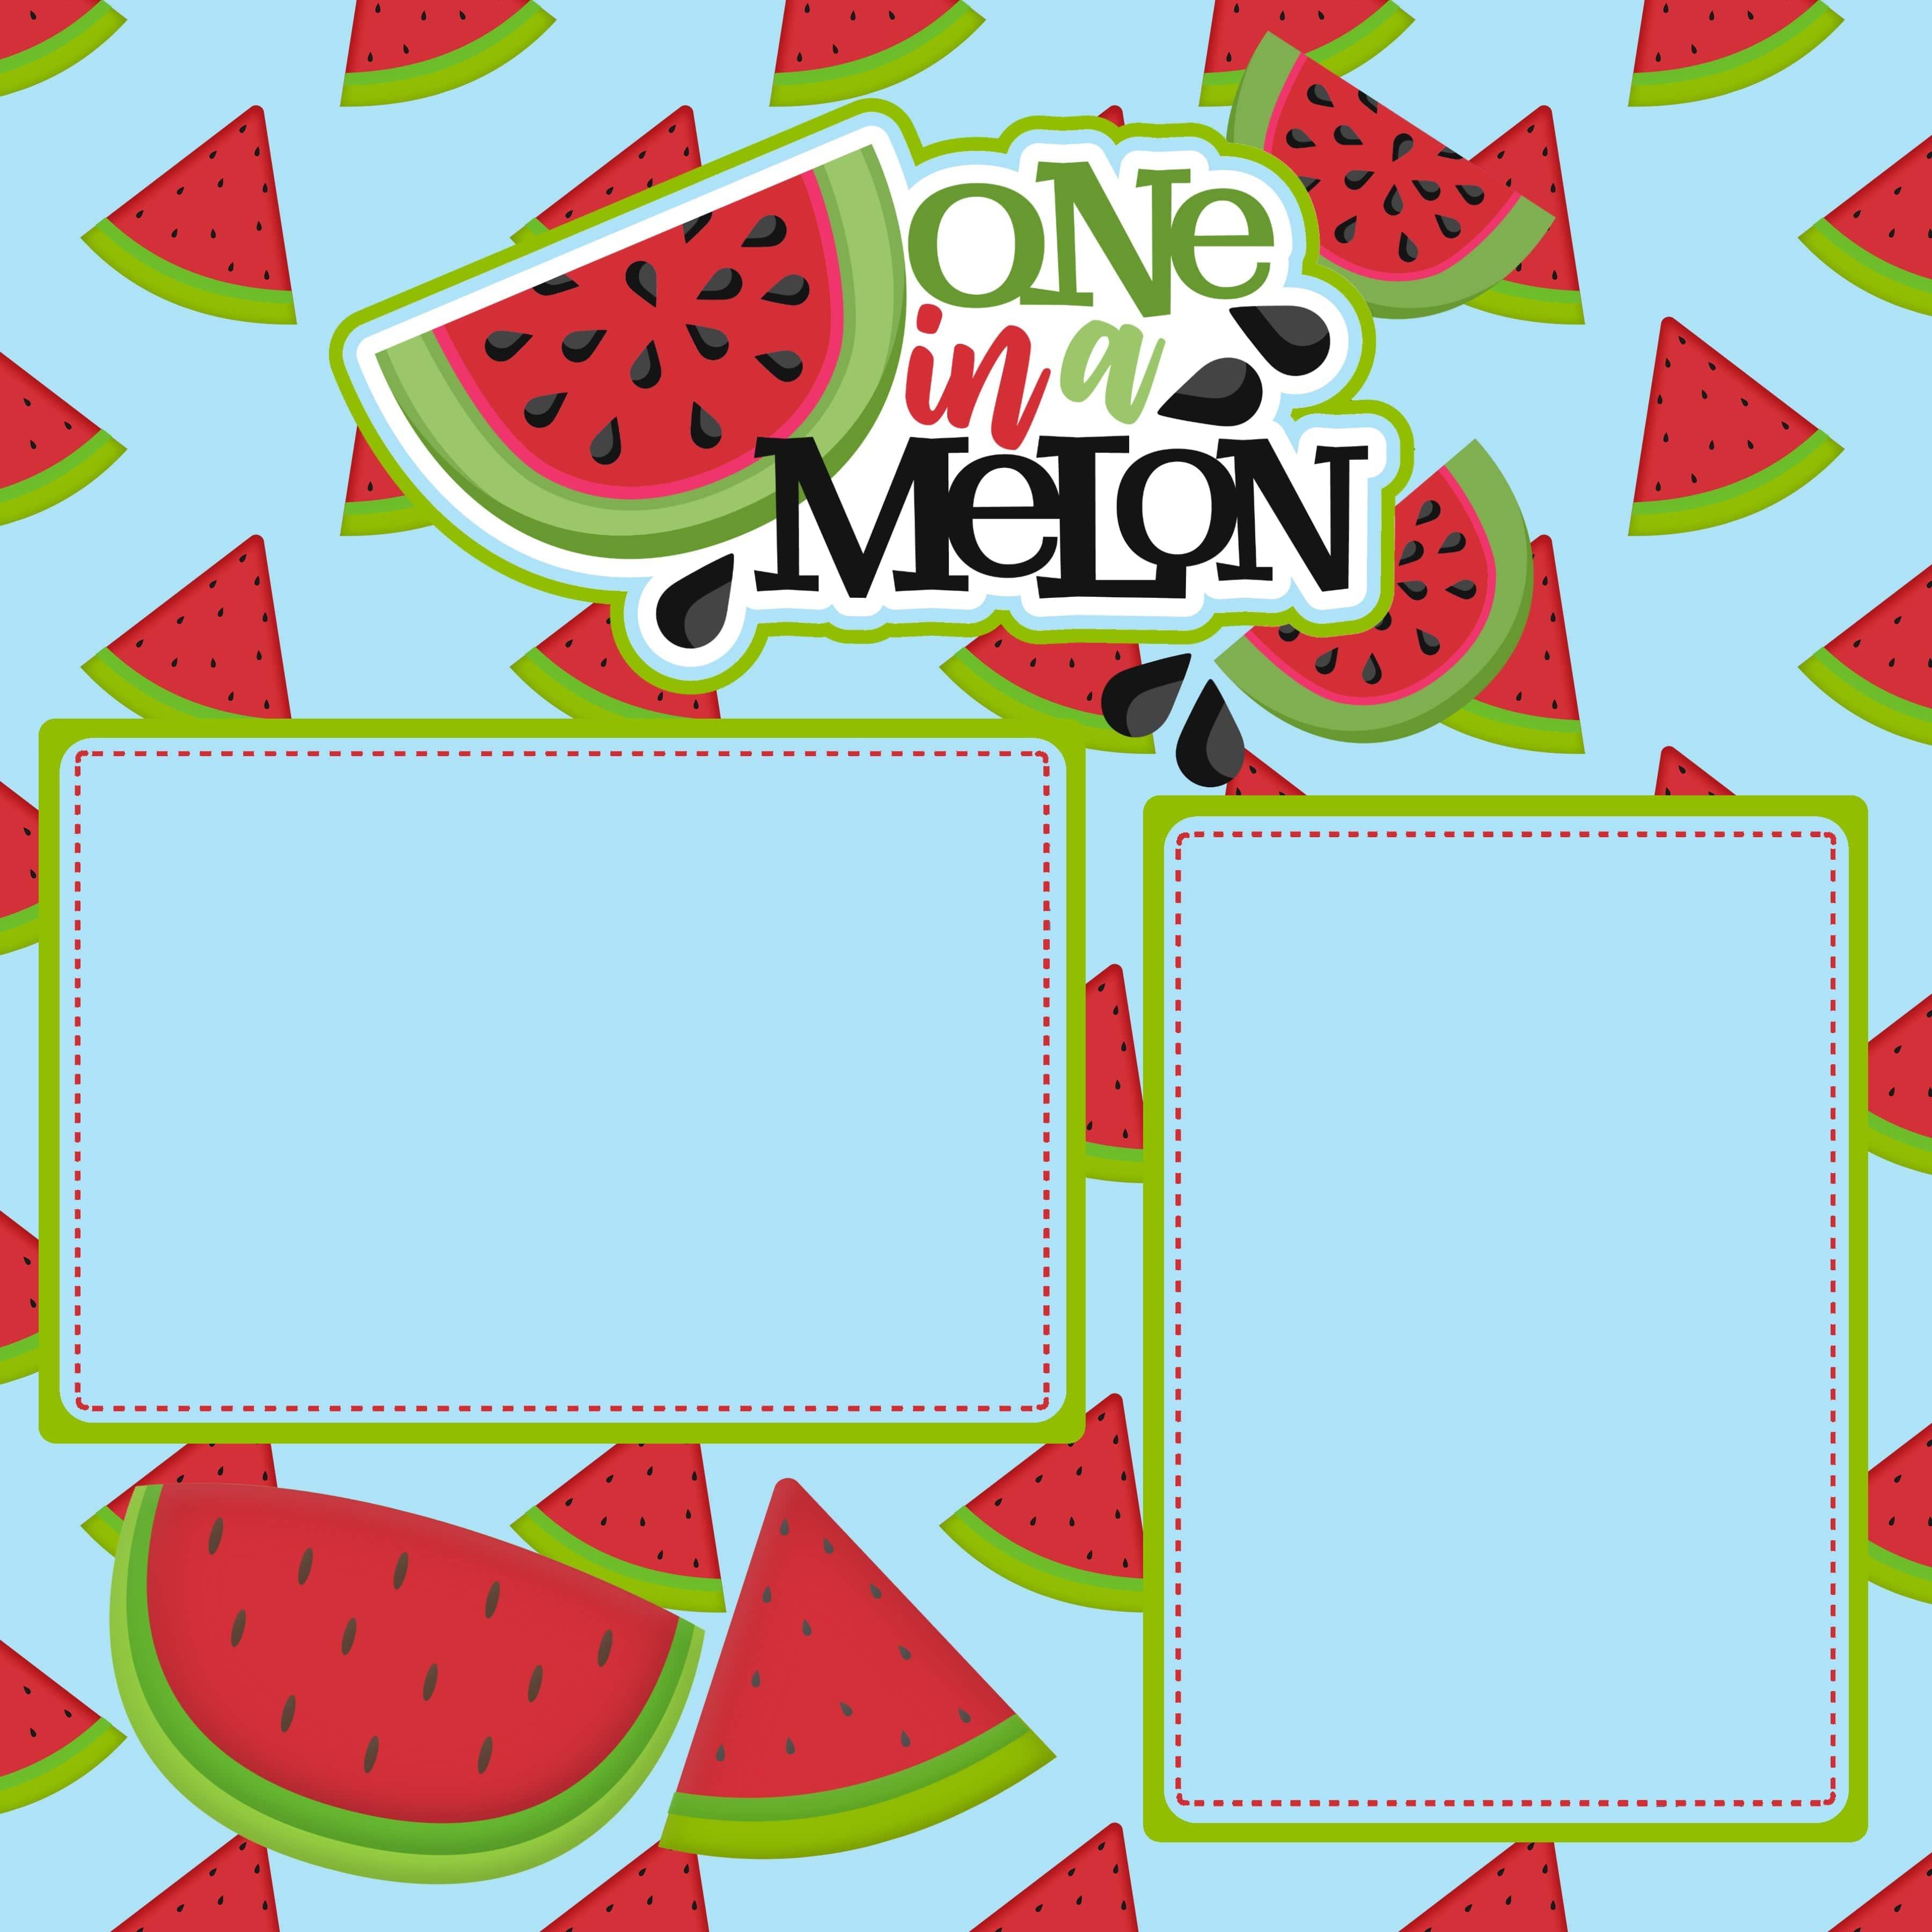 One In A Melon Punny (2) - 12 x 12 Premade, Printed Scrapbook Pages by SSC Designs - Scrapbook Supply Companies